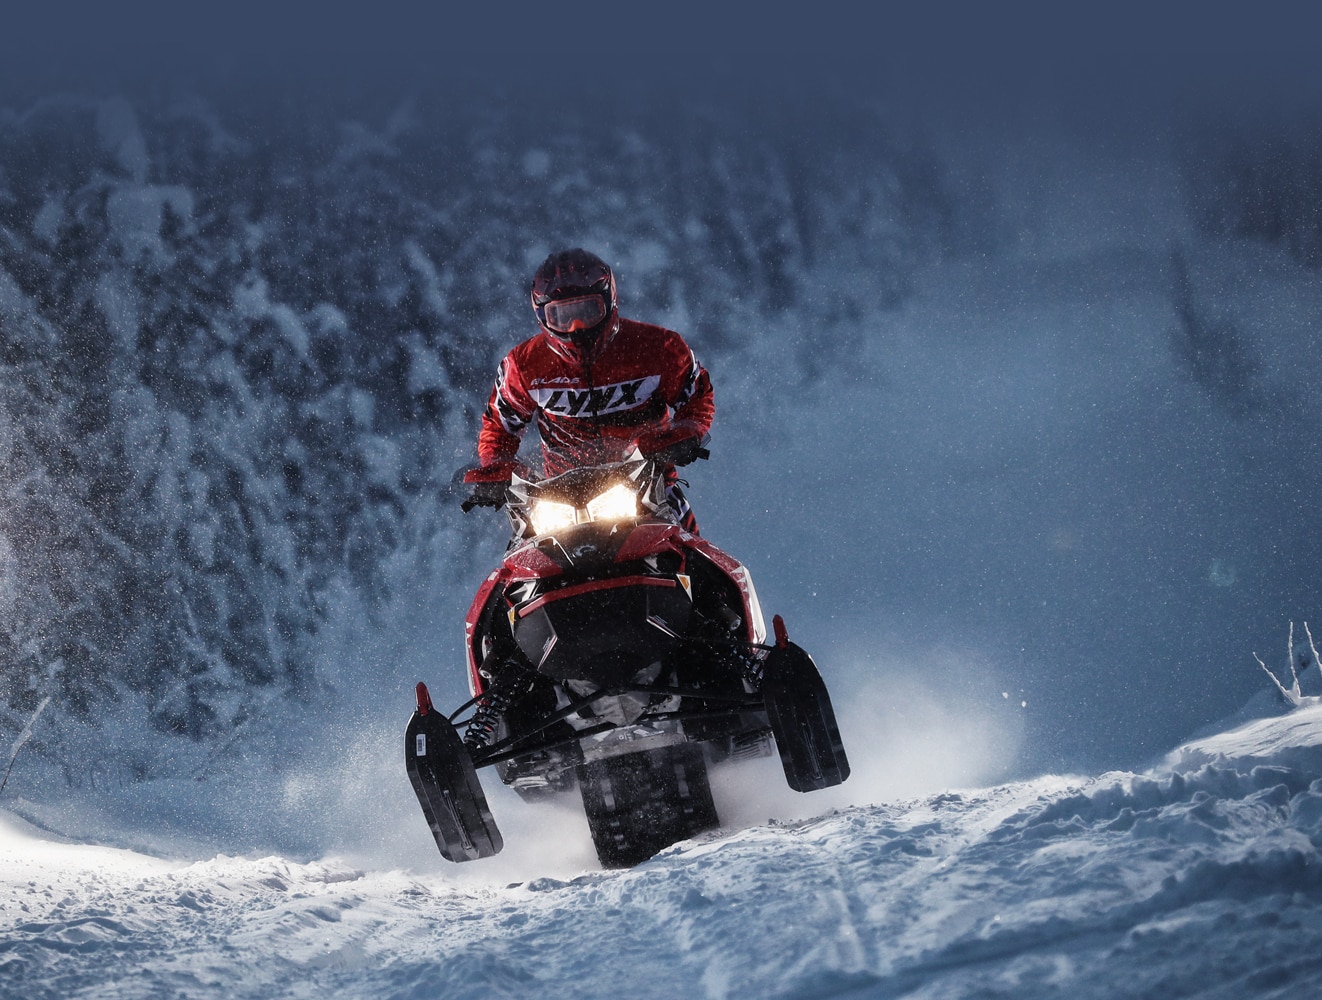 A man is riding his Lynx Rave Re Snowmobile Model at high speed during the night